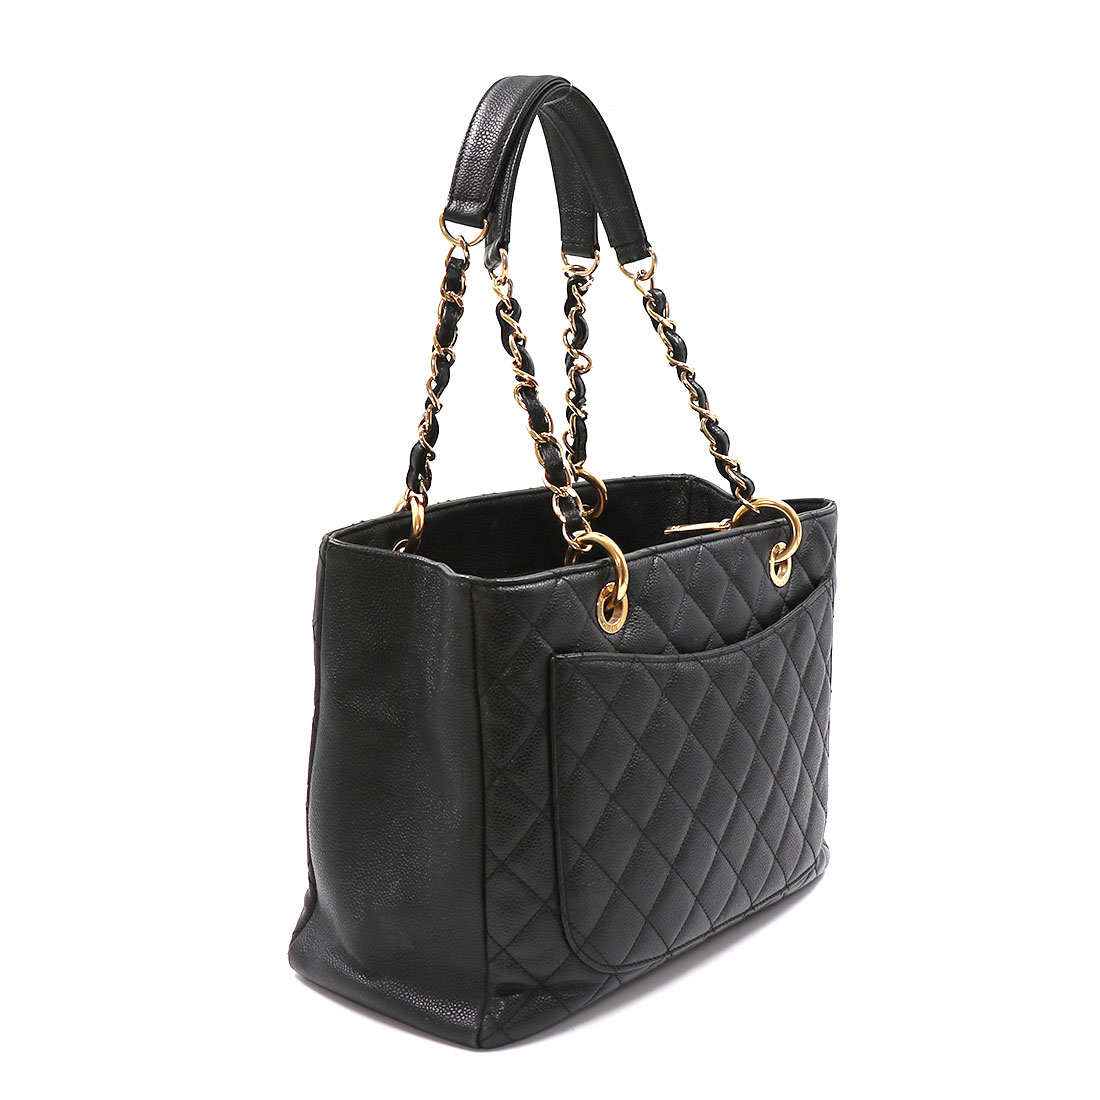 Chanel Black Quilted Caviar Leather Grand Shopping Tote Bag - The